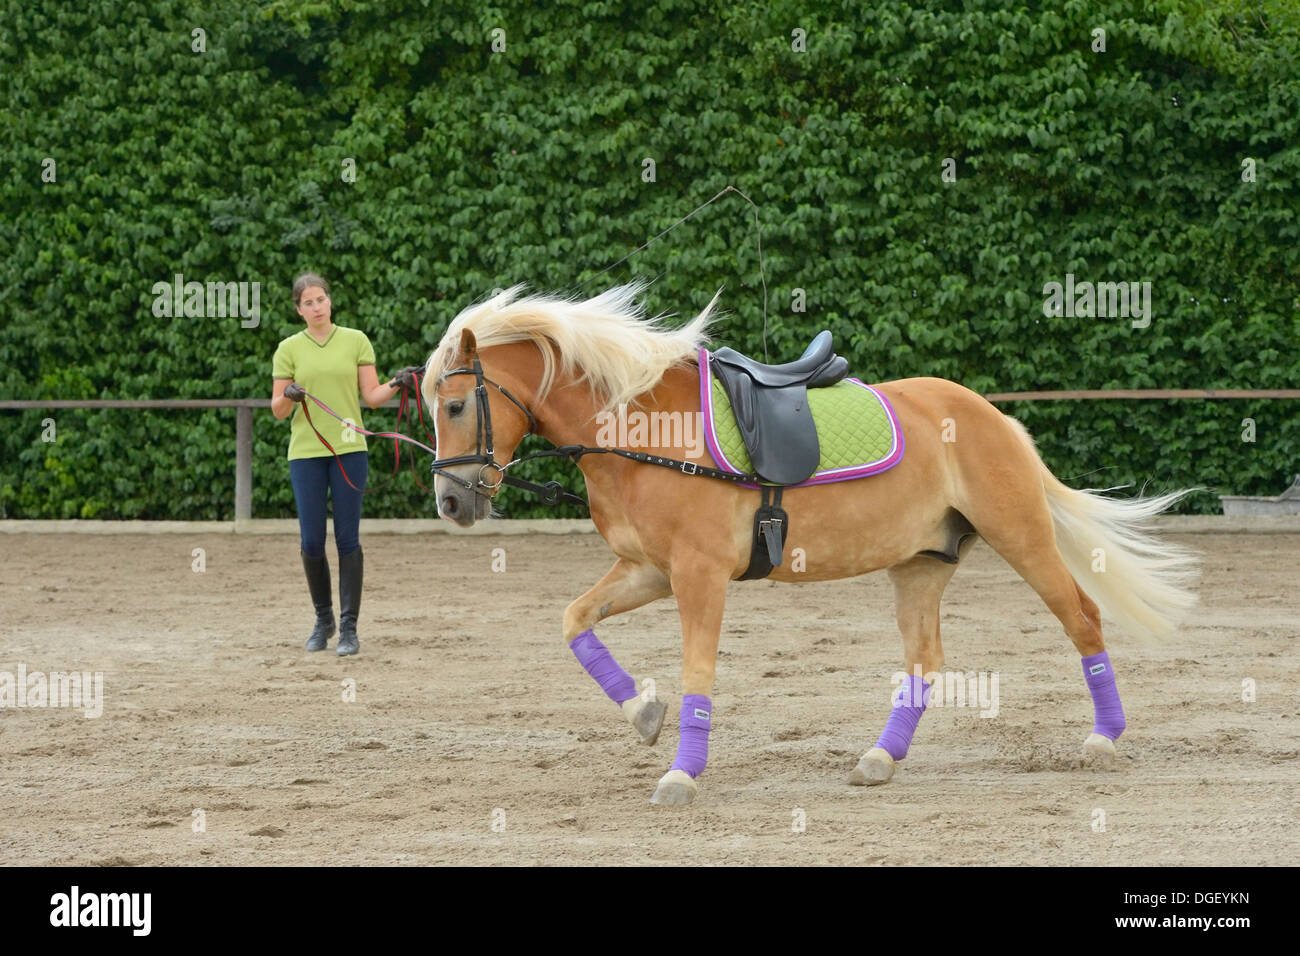 Lunging before riding (Haflinger horse) Stock Photo